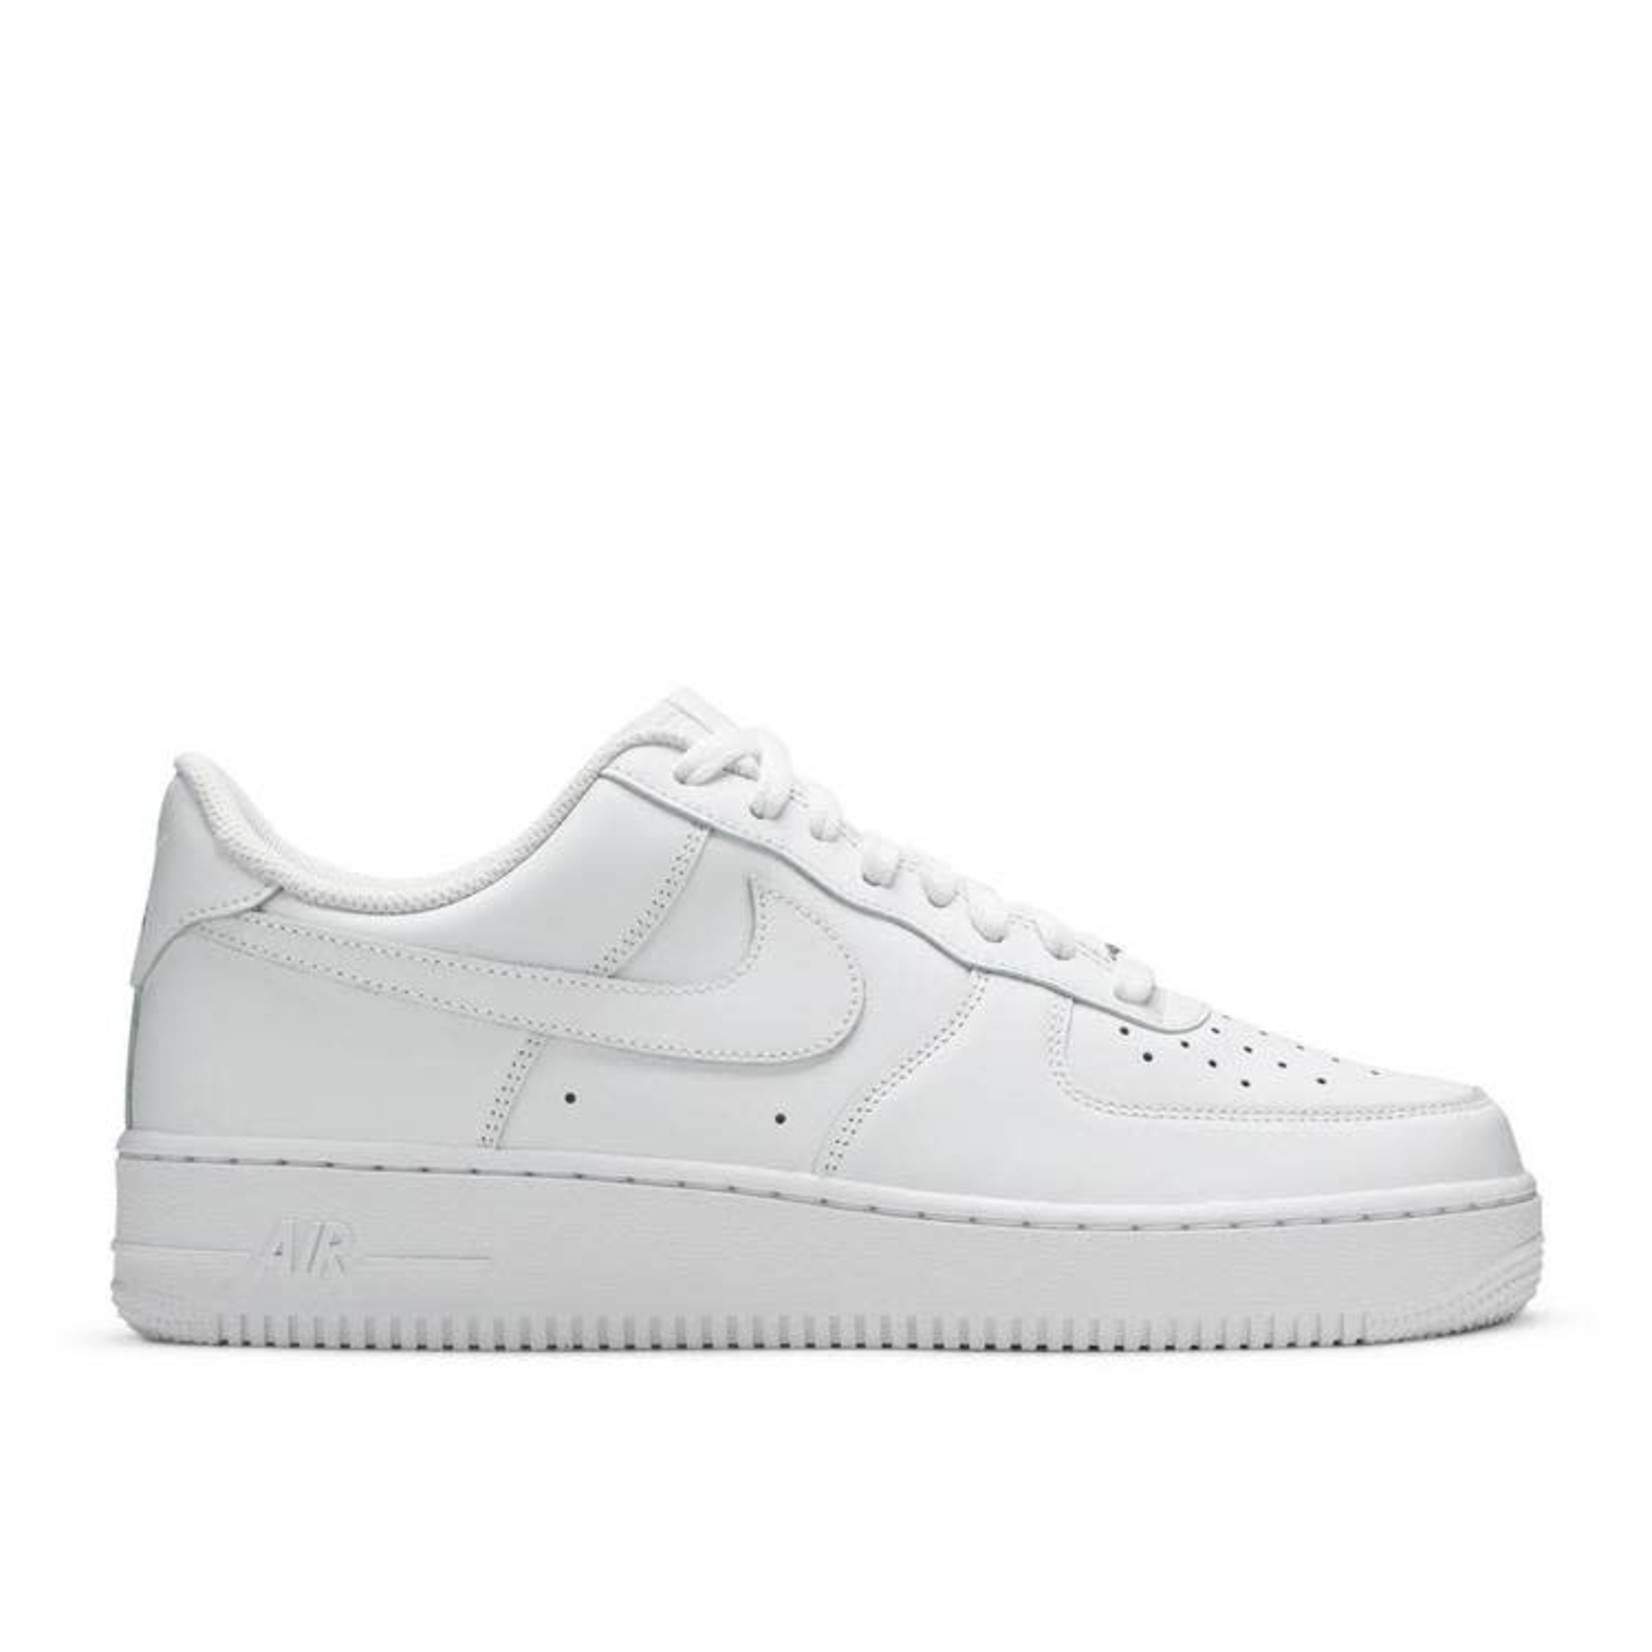 Nike Nike Air Force 1 Low LE Triple White (GS) Size 7, DS BRAND NEW